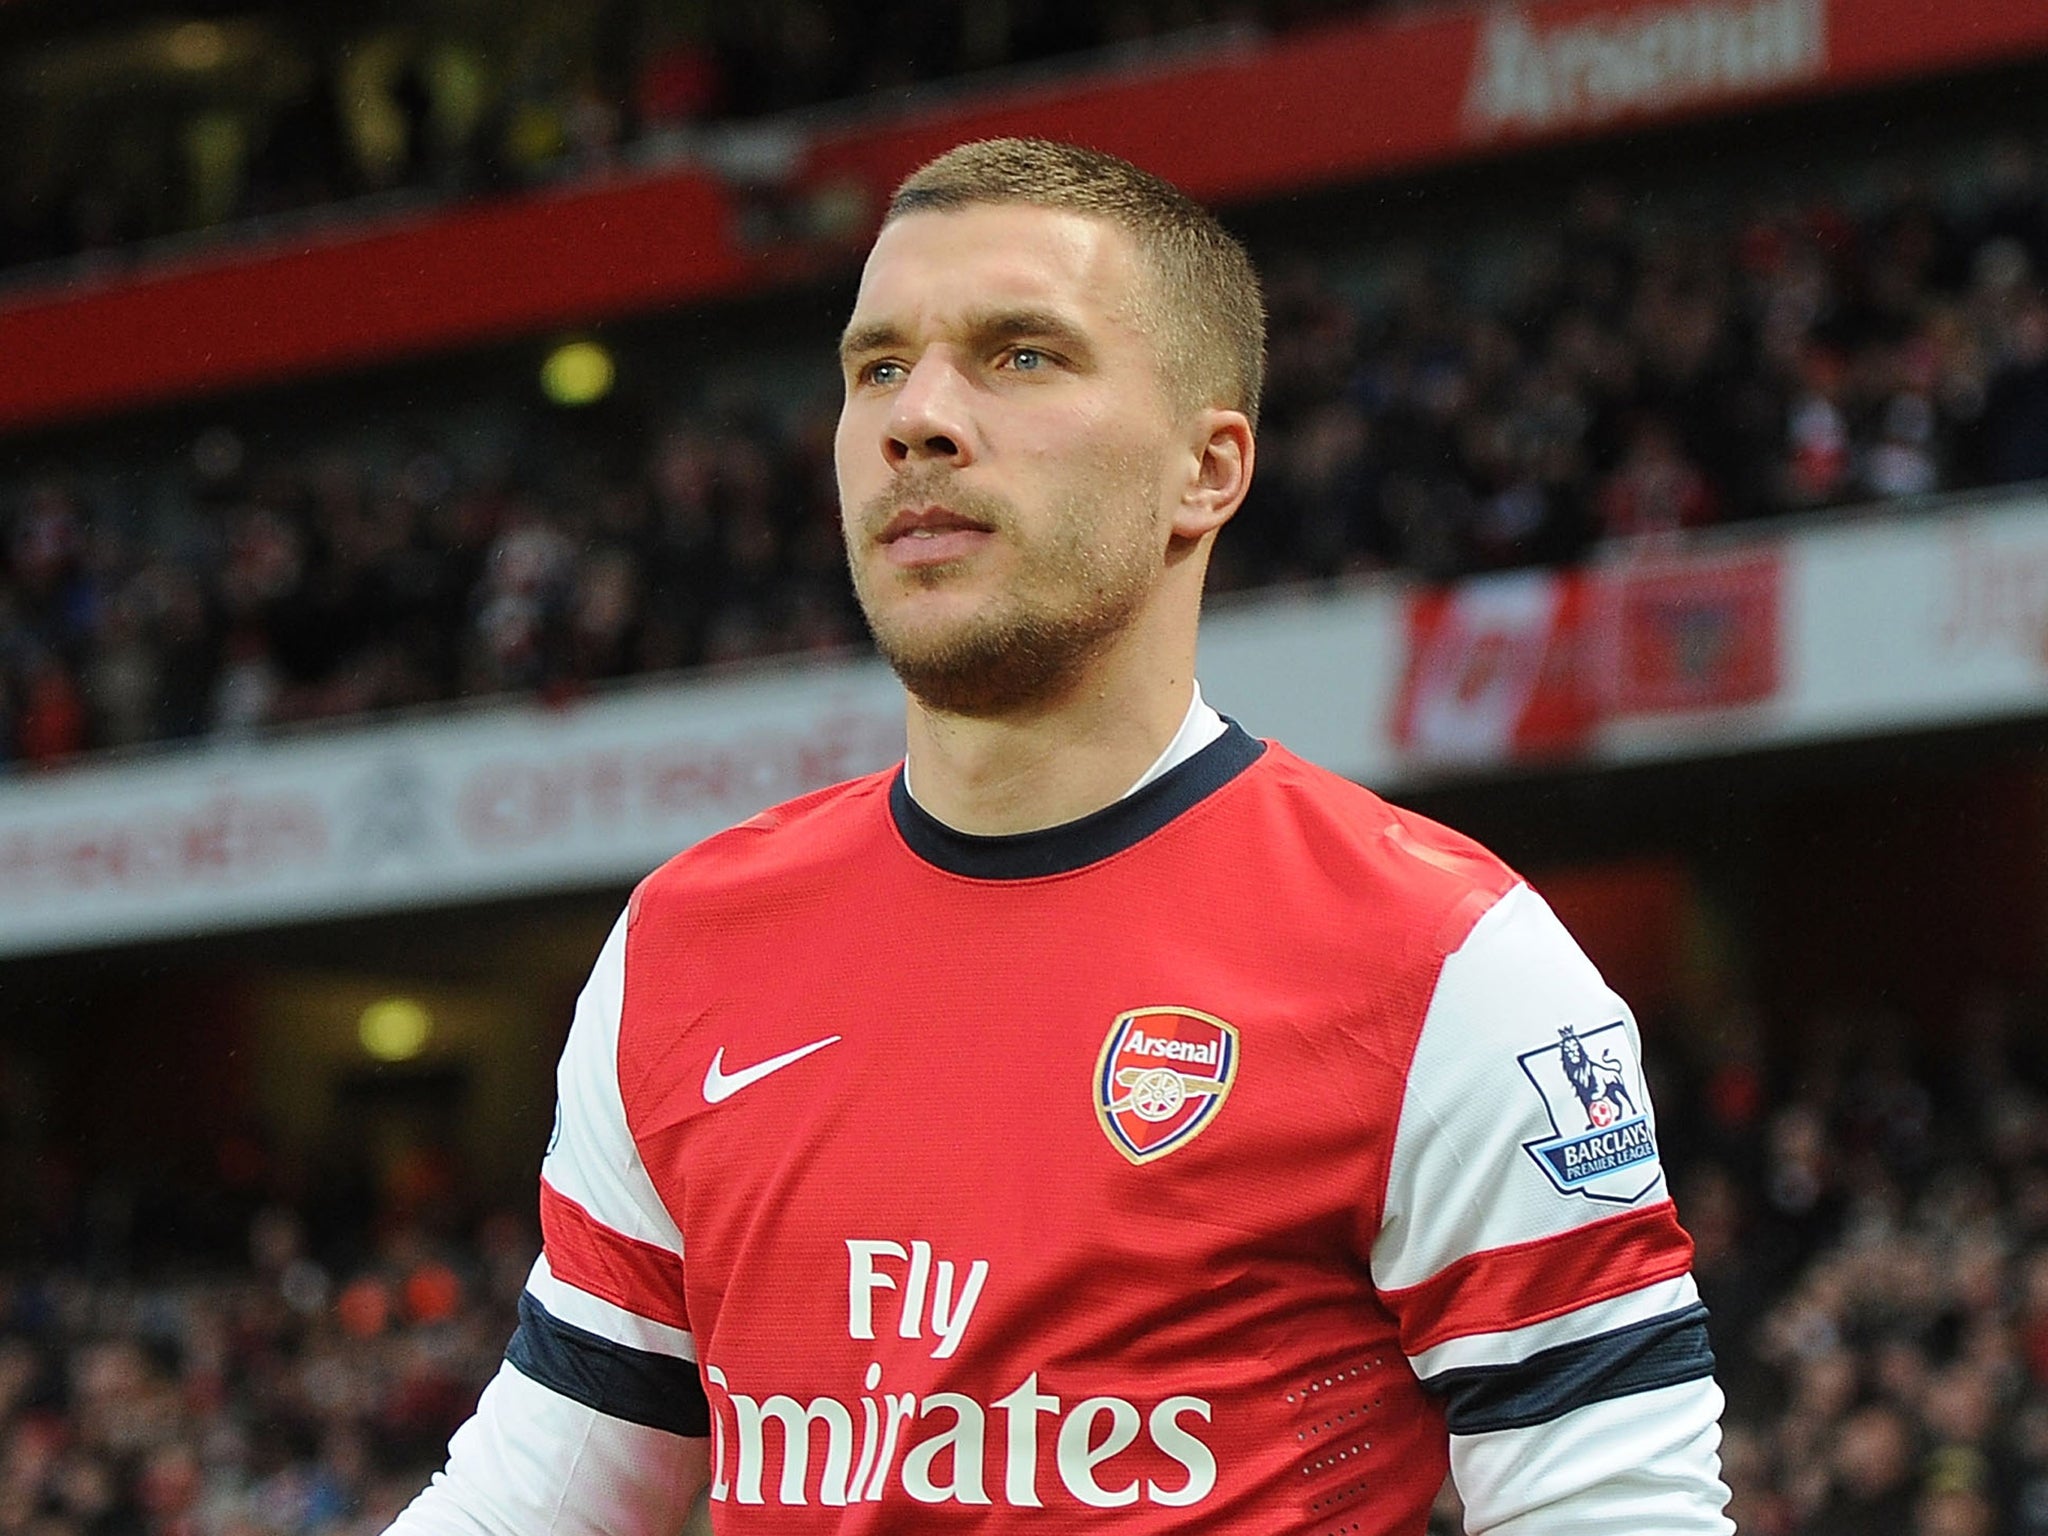 Lukas Podolski has been credited as 'one of the best finishers I have ever seen' by his manager Arsene Wenger